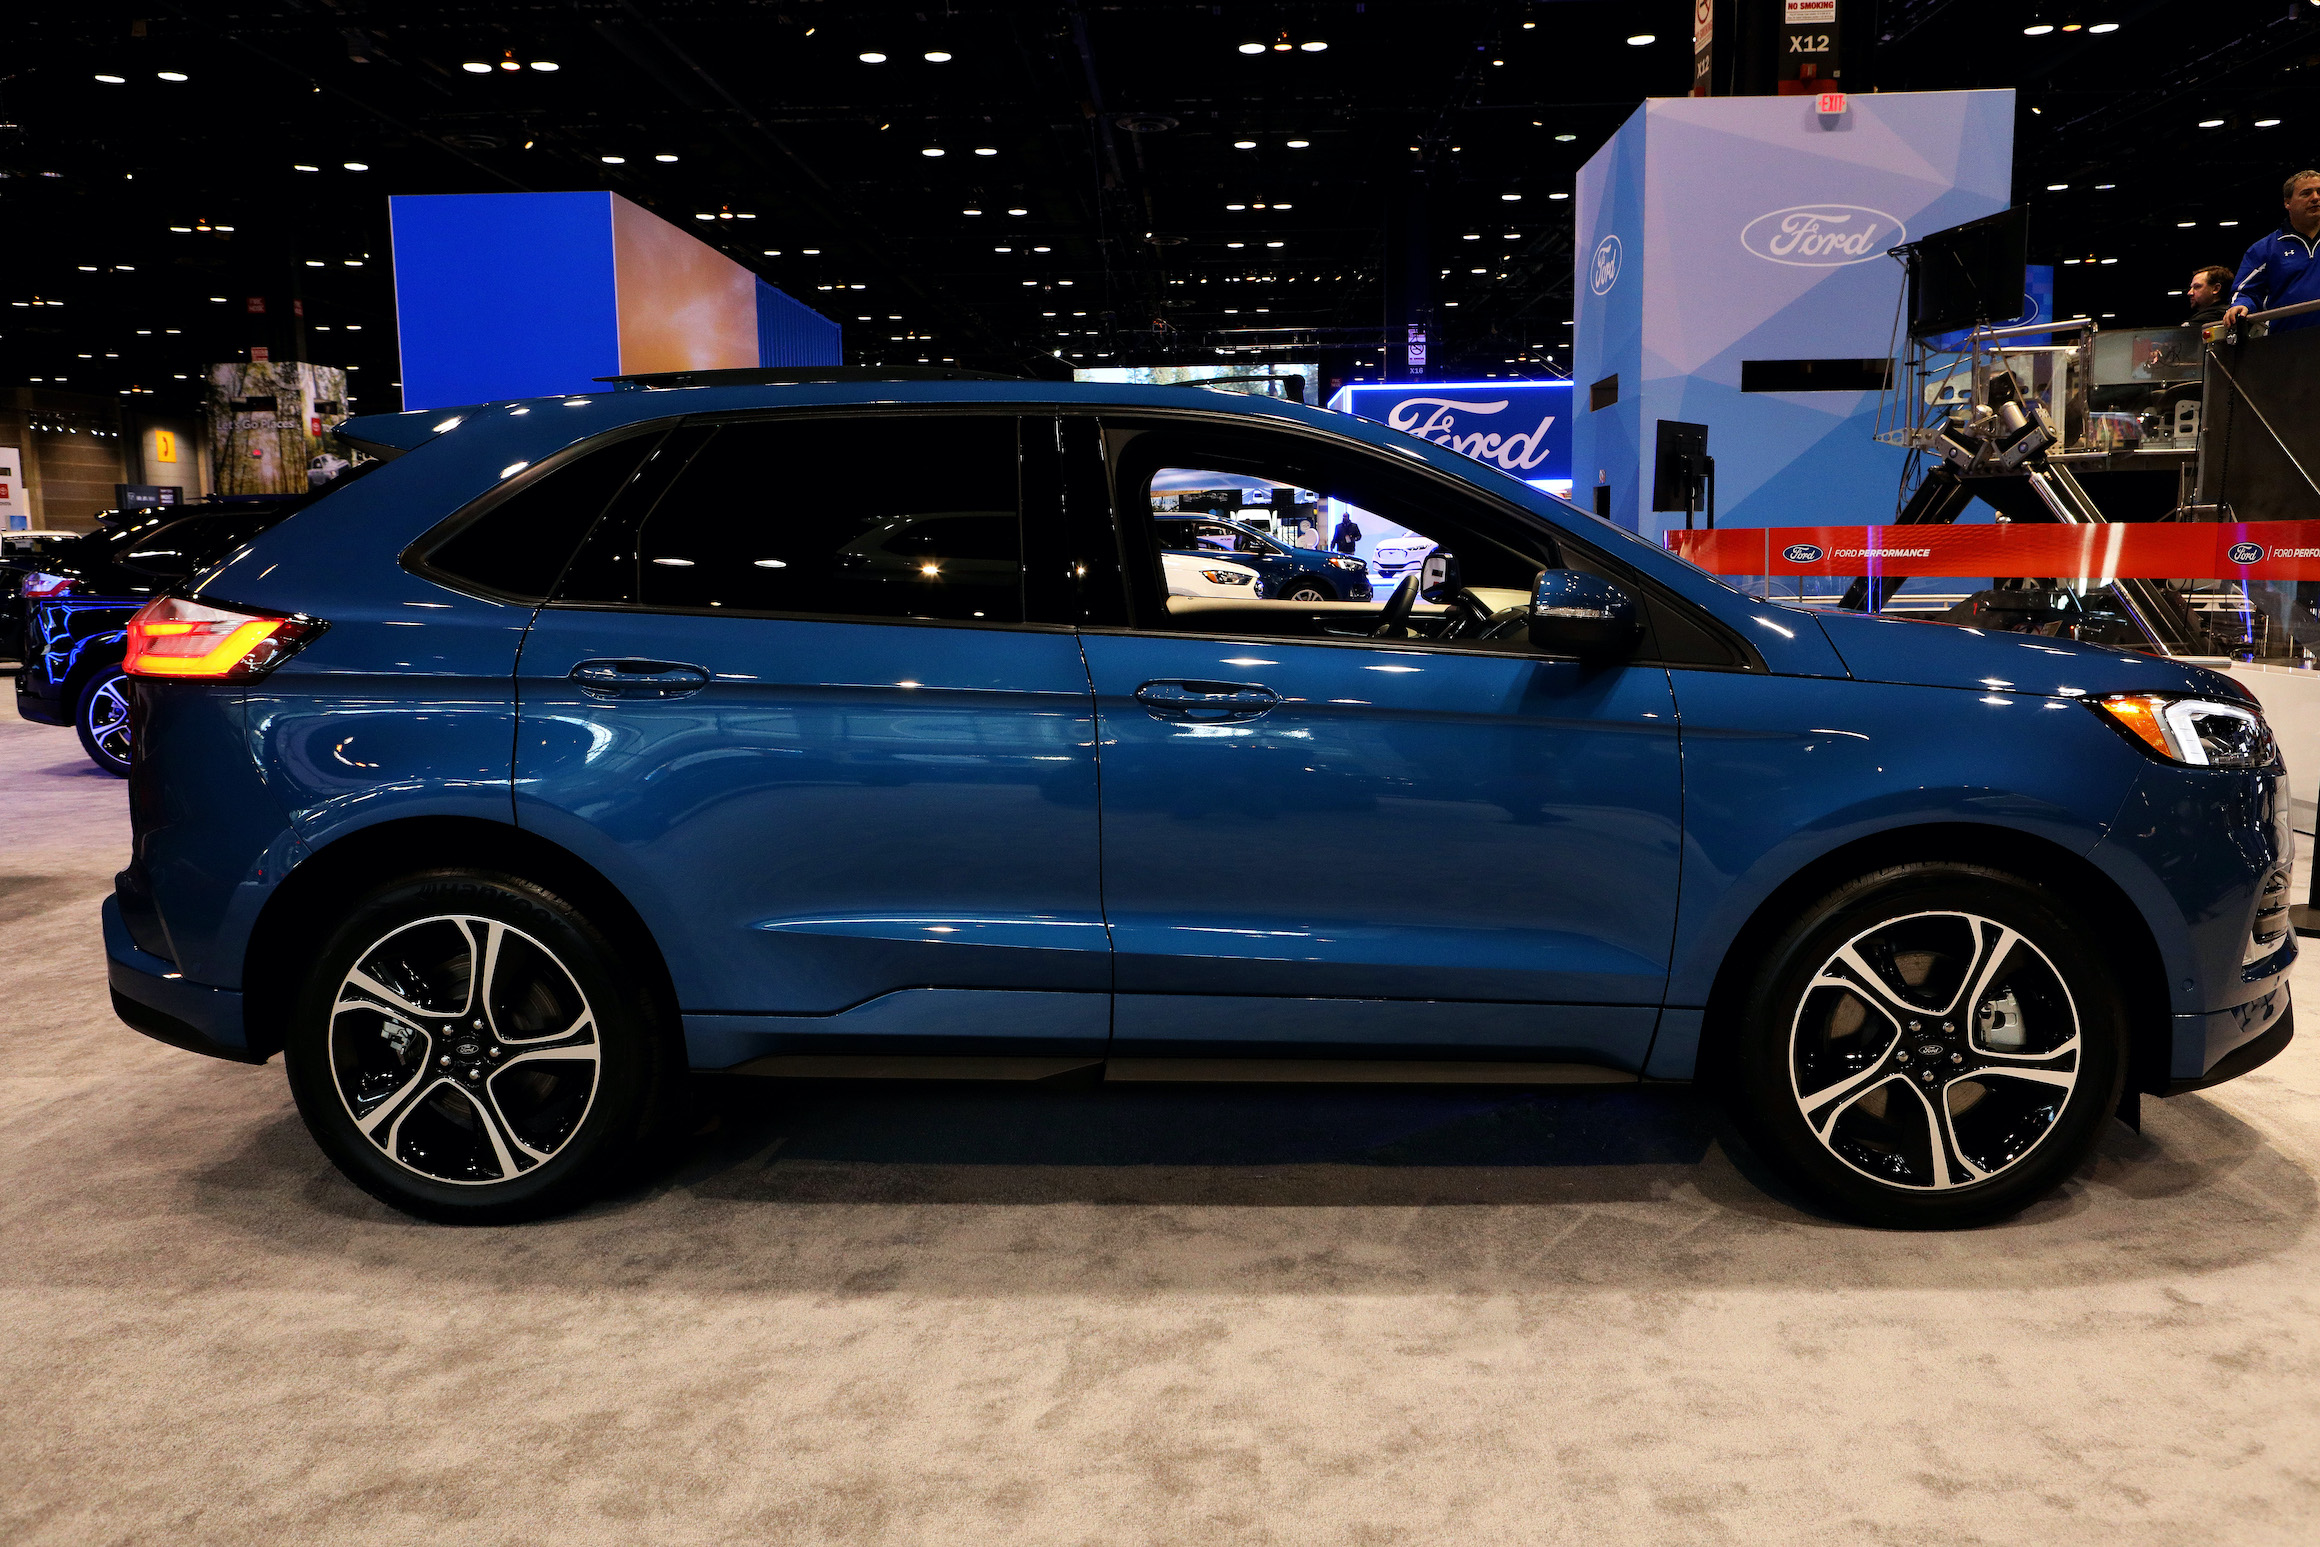 2020 Ford Edge is on display at the 112th Annual Chicago Auto Show